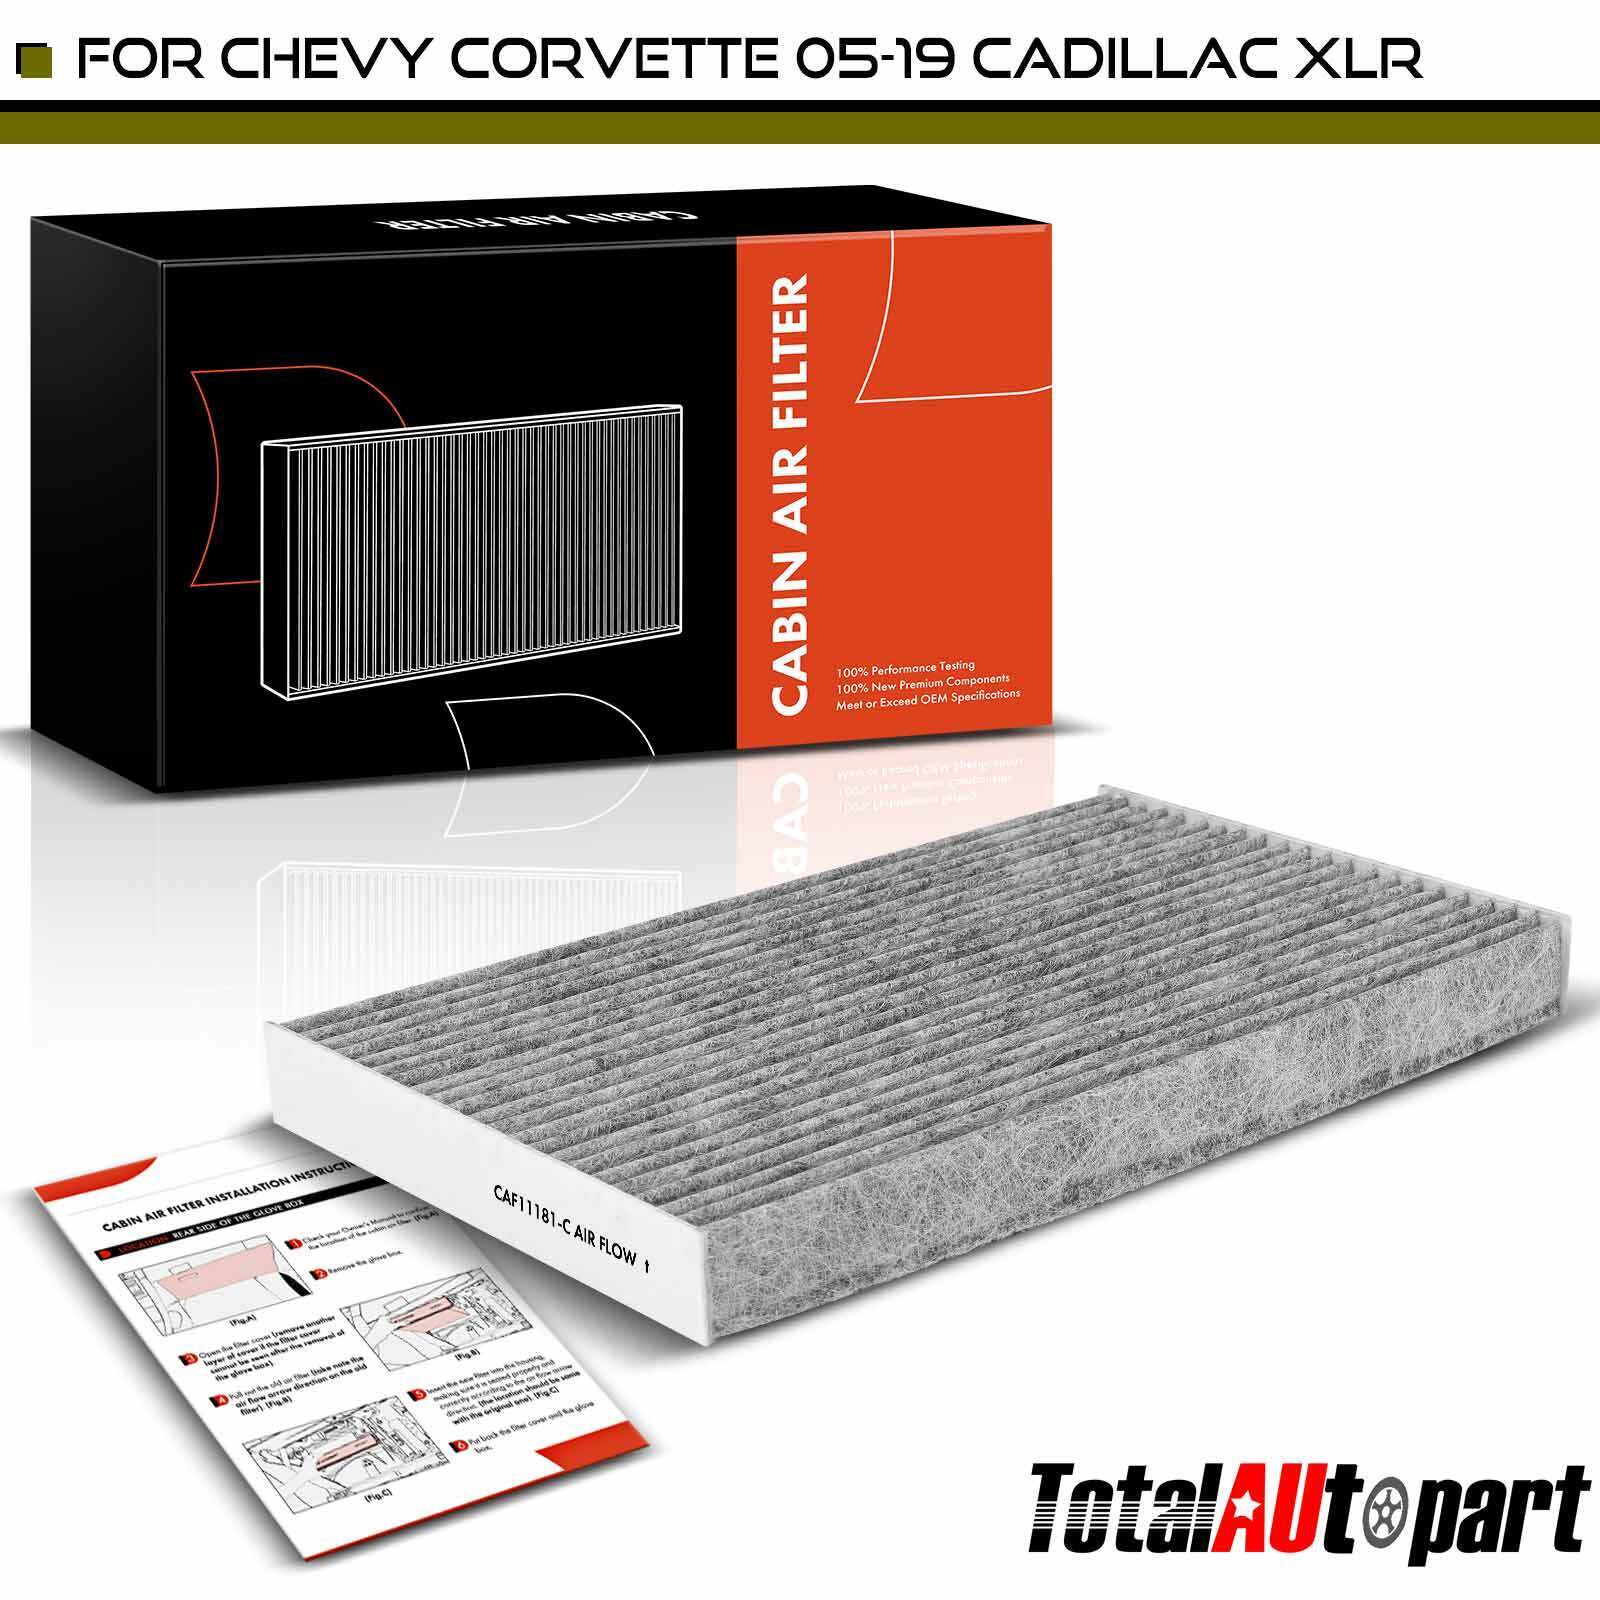 Activated Carbon Cabin Air Filter for Chevrolet Corvette 2005-2019 Cadillac XLR